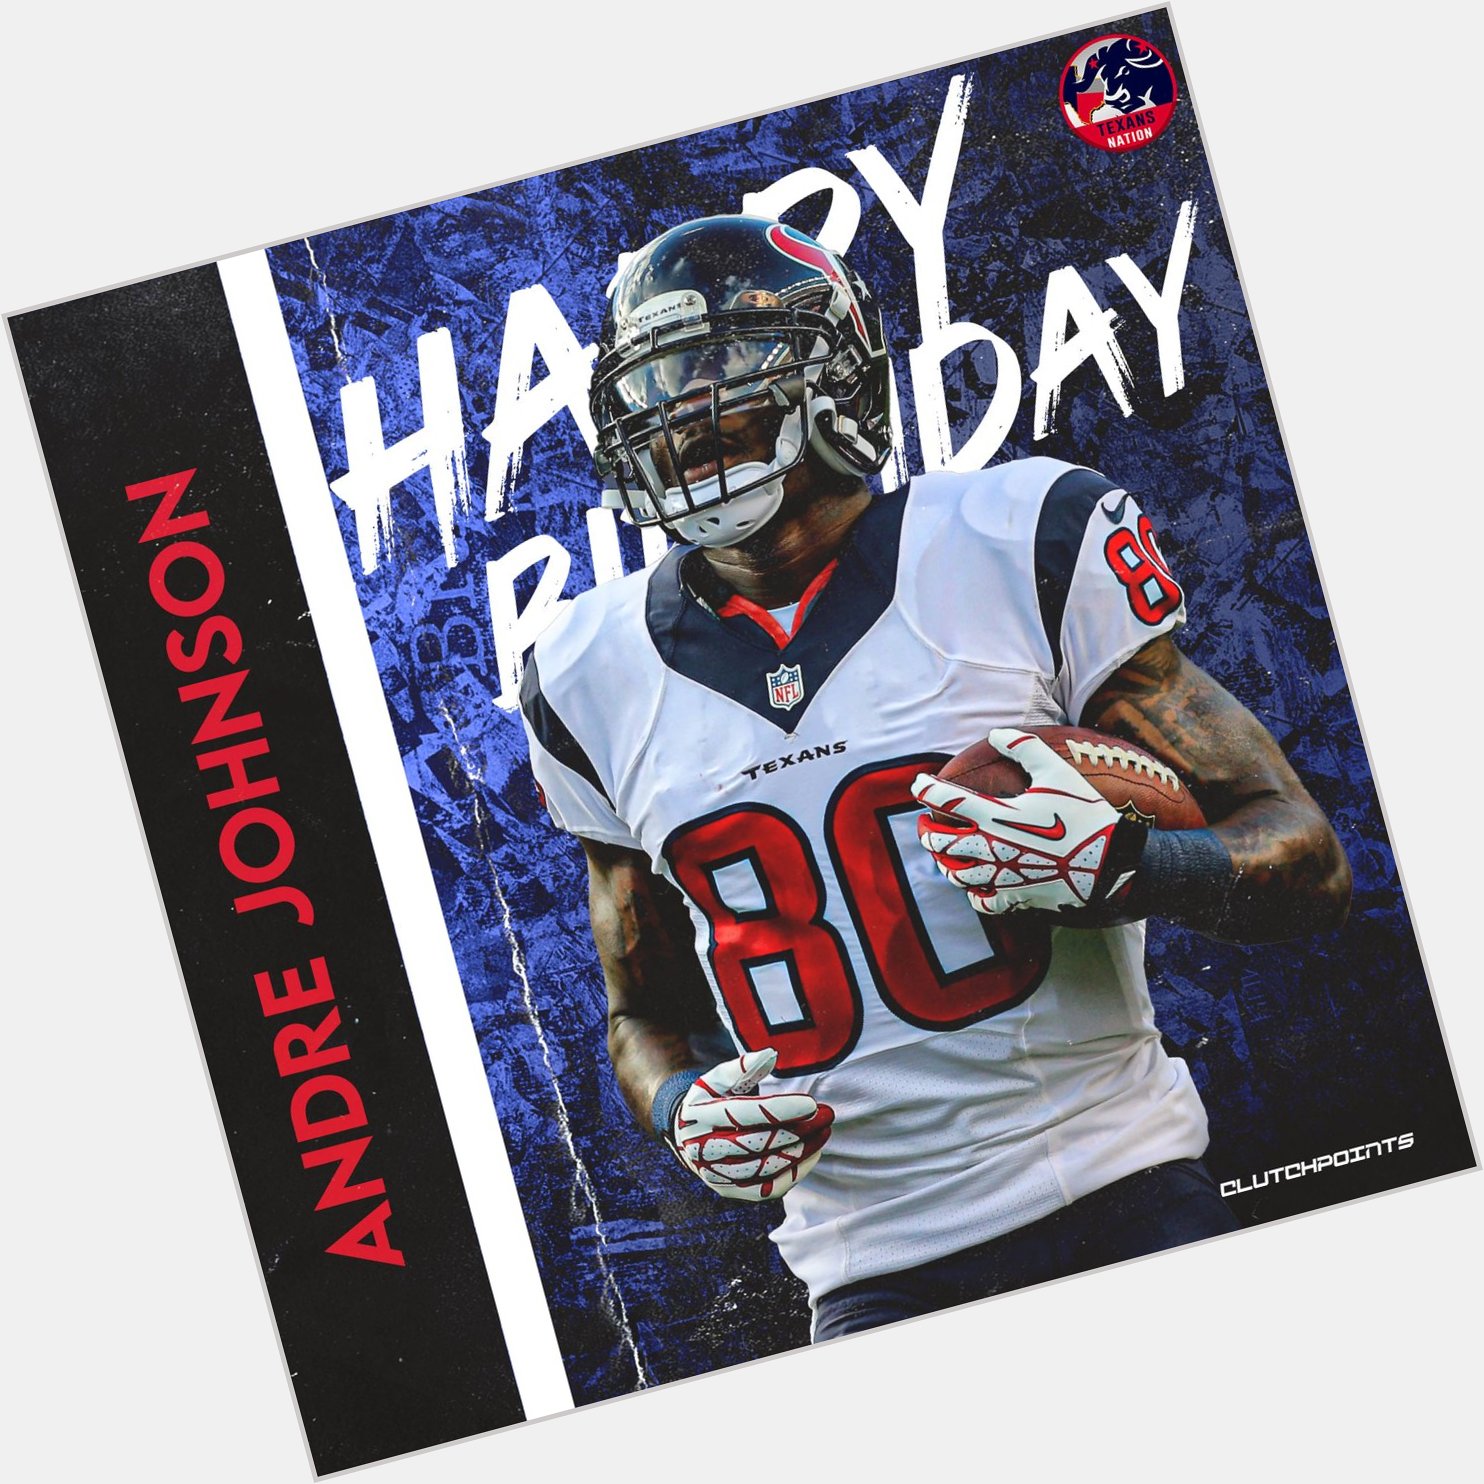 Join Texans Nation in greeting Andre Johnson a happy 40th birthday! 